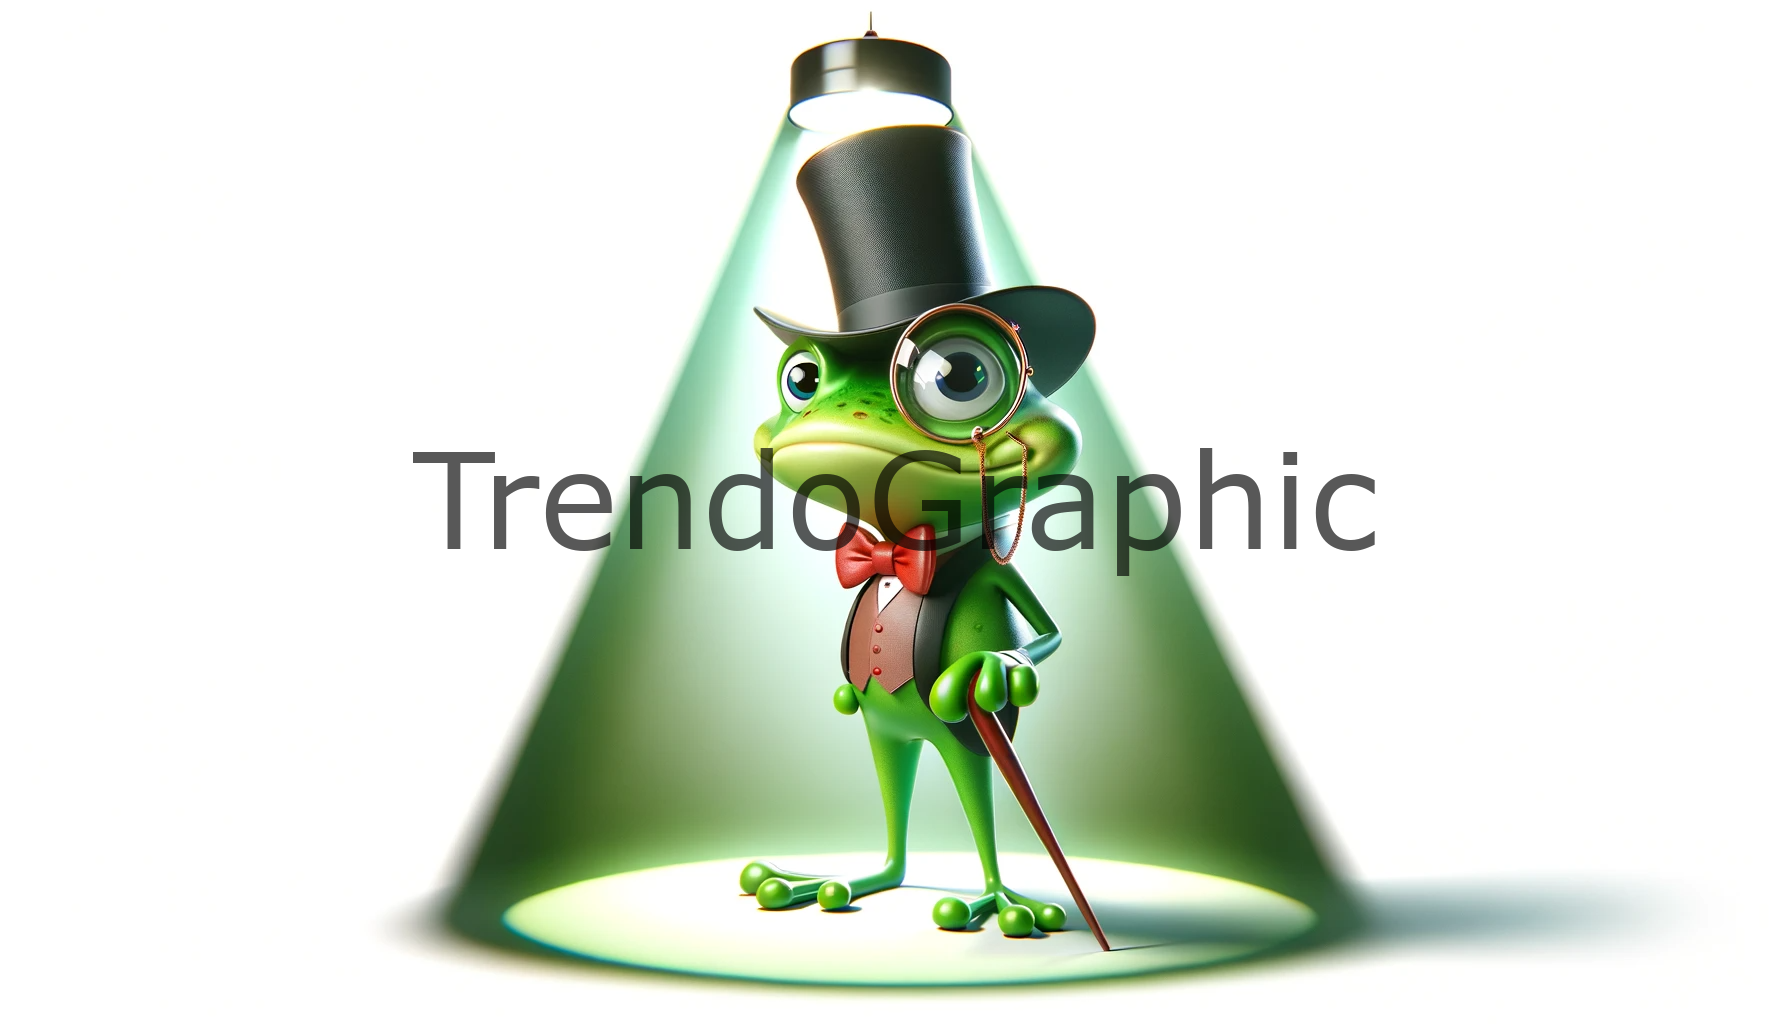 Anthropomorphic Frog with Top Hat Illustration